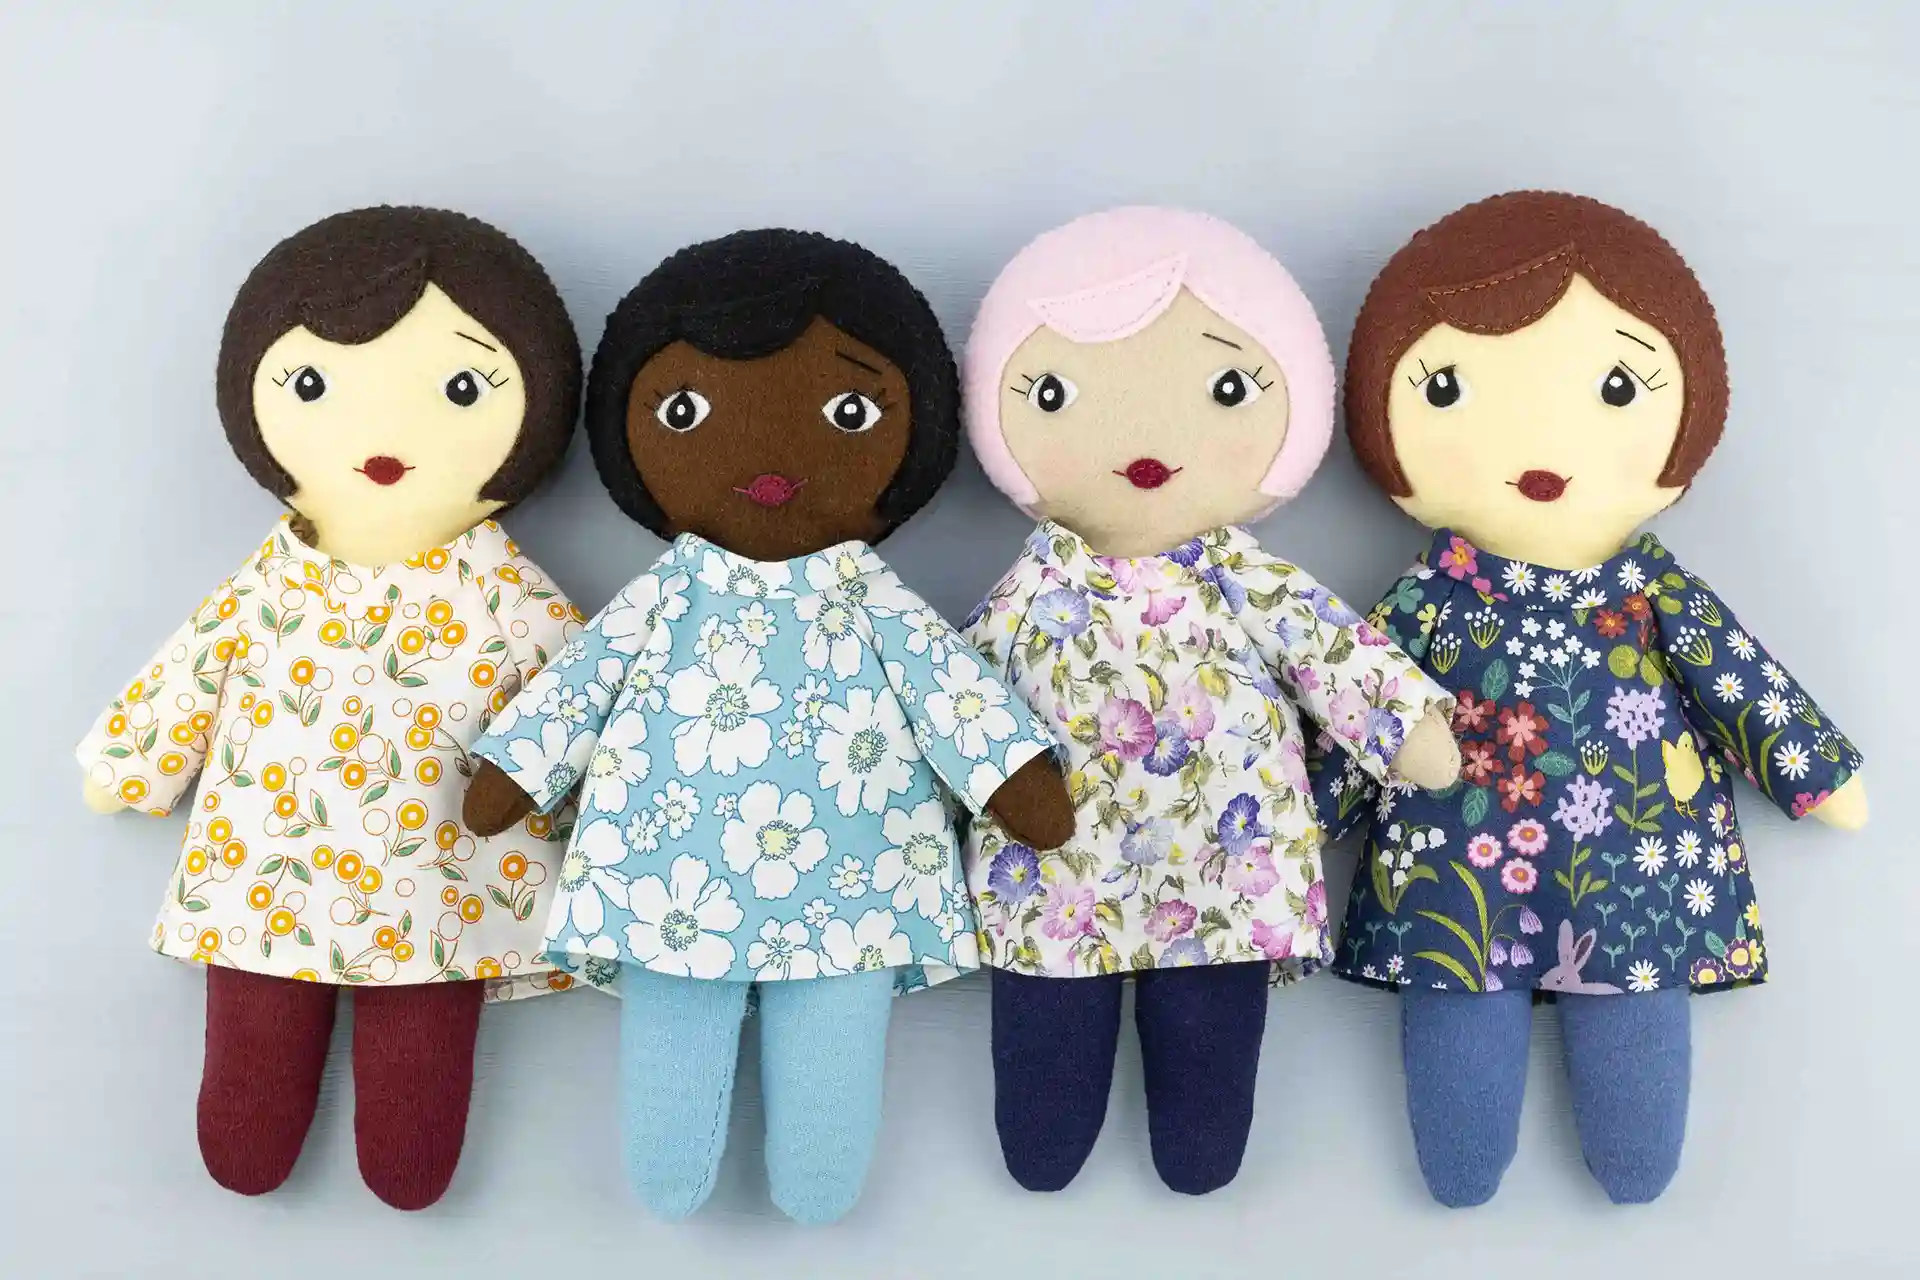 A row of four Daisy dolls with different hair colours and skin tones, wearing floral print tunics and jersey tights.